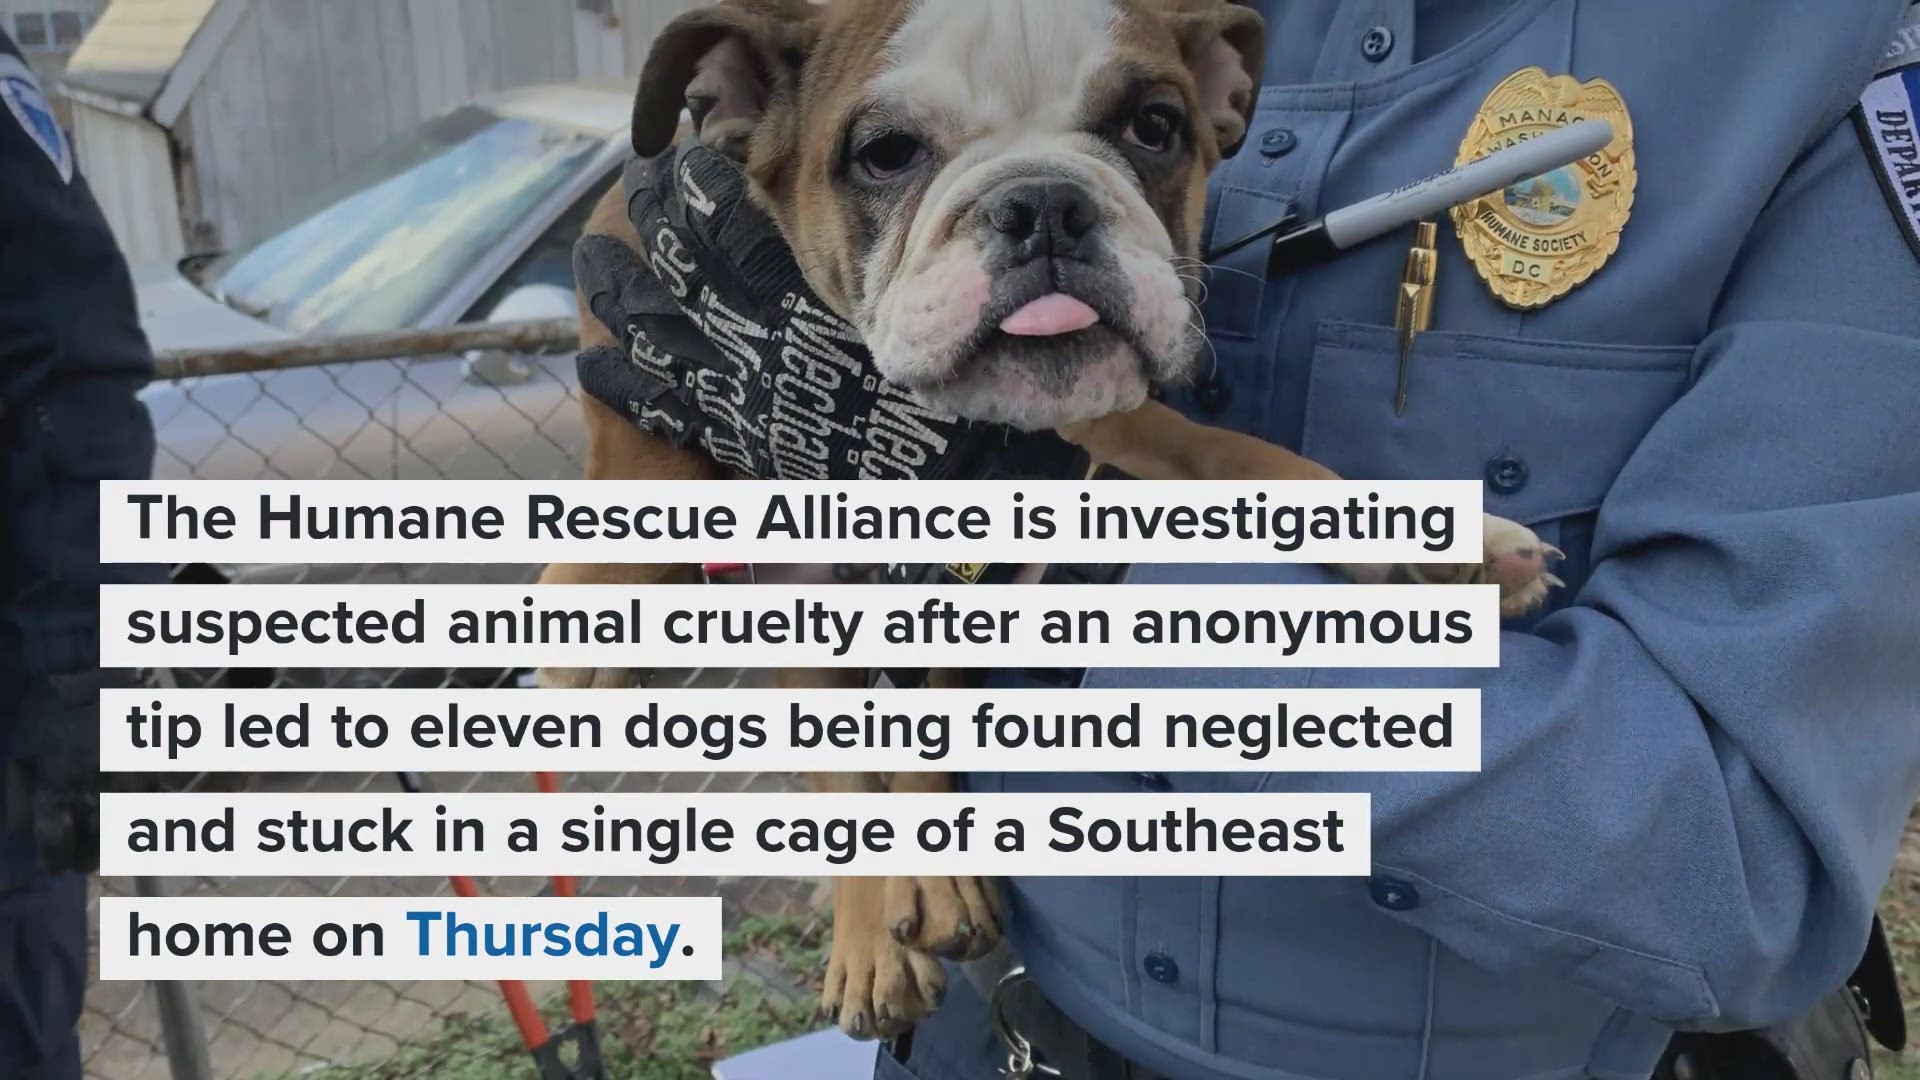 After an anonymous tip, the dogs -- which range from puppies to adults -- were found at a Southeast home Thursday. Now, the Humane Rescue Alliance is rescuing them.